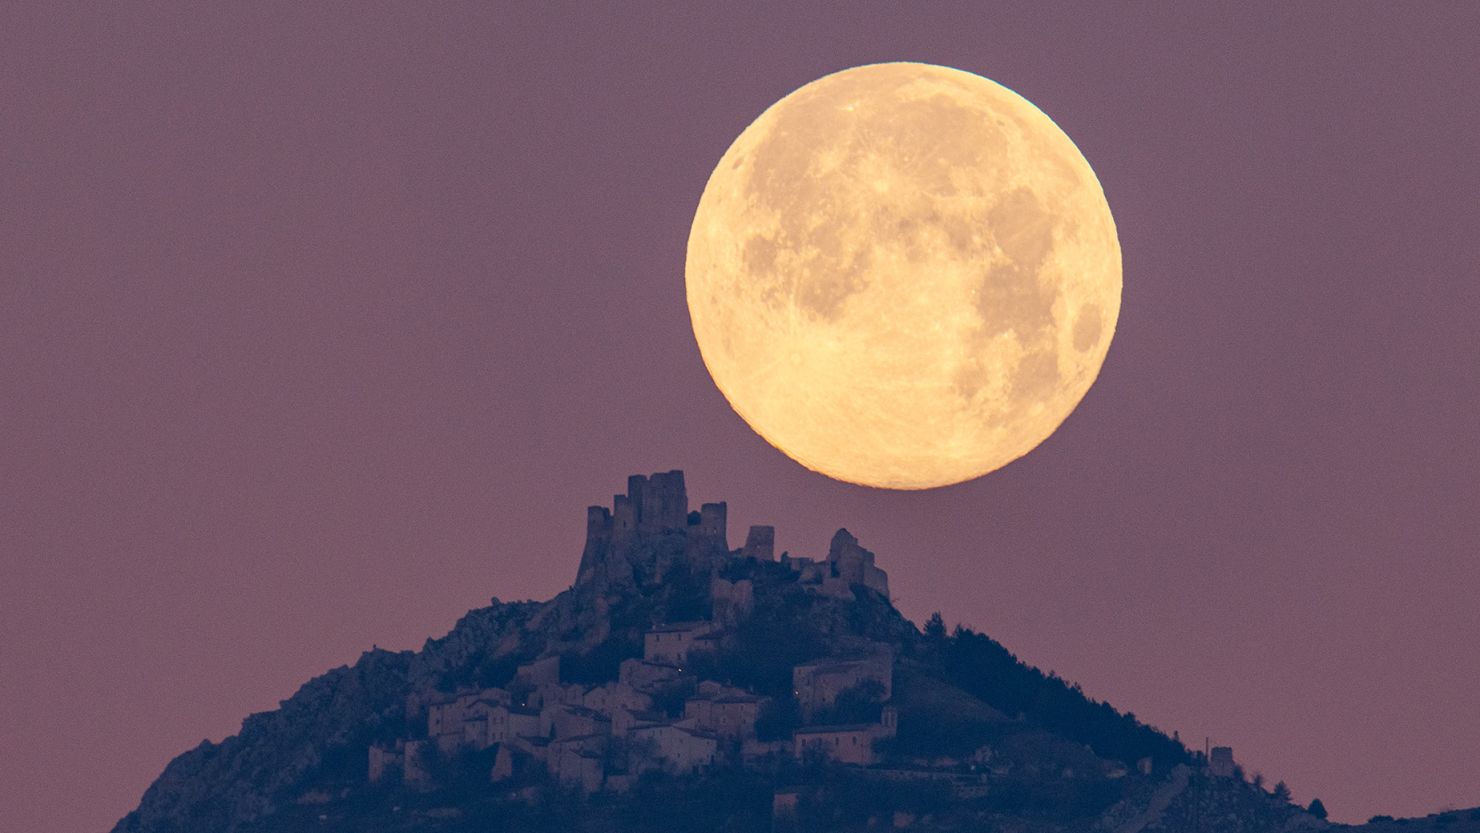 The wolf moon can be seen setting behind the castle of Rocca Calascio in the Abruzzo region of Italy, on January 7, 2023.